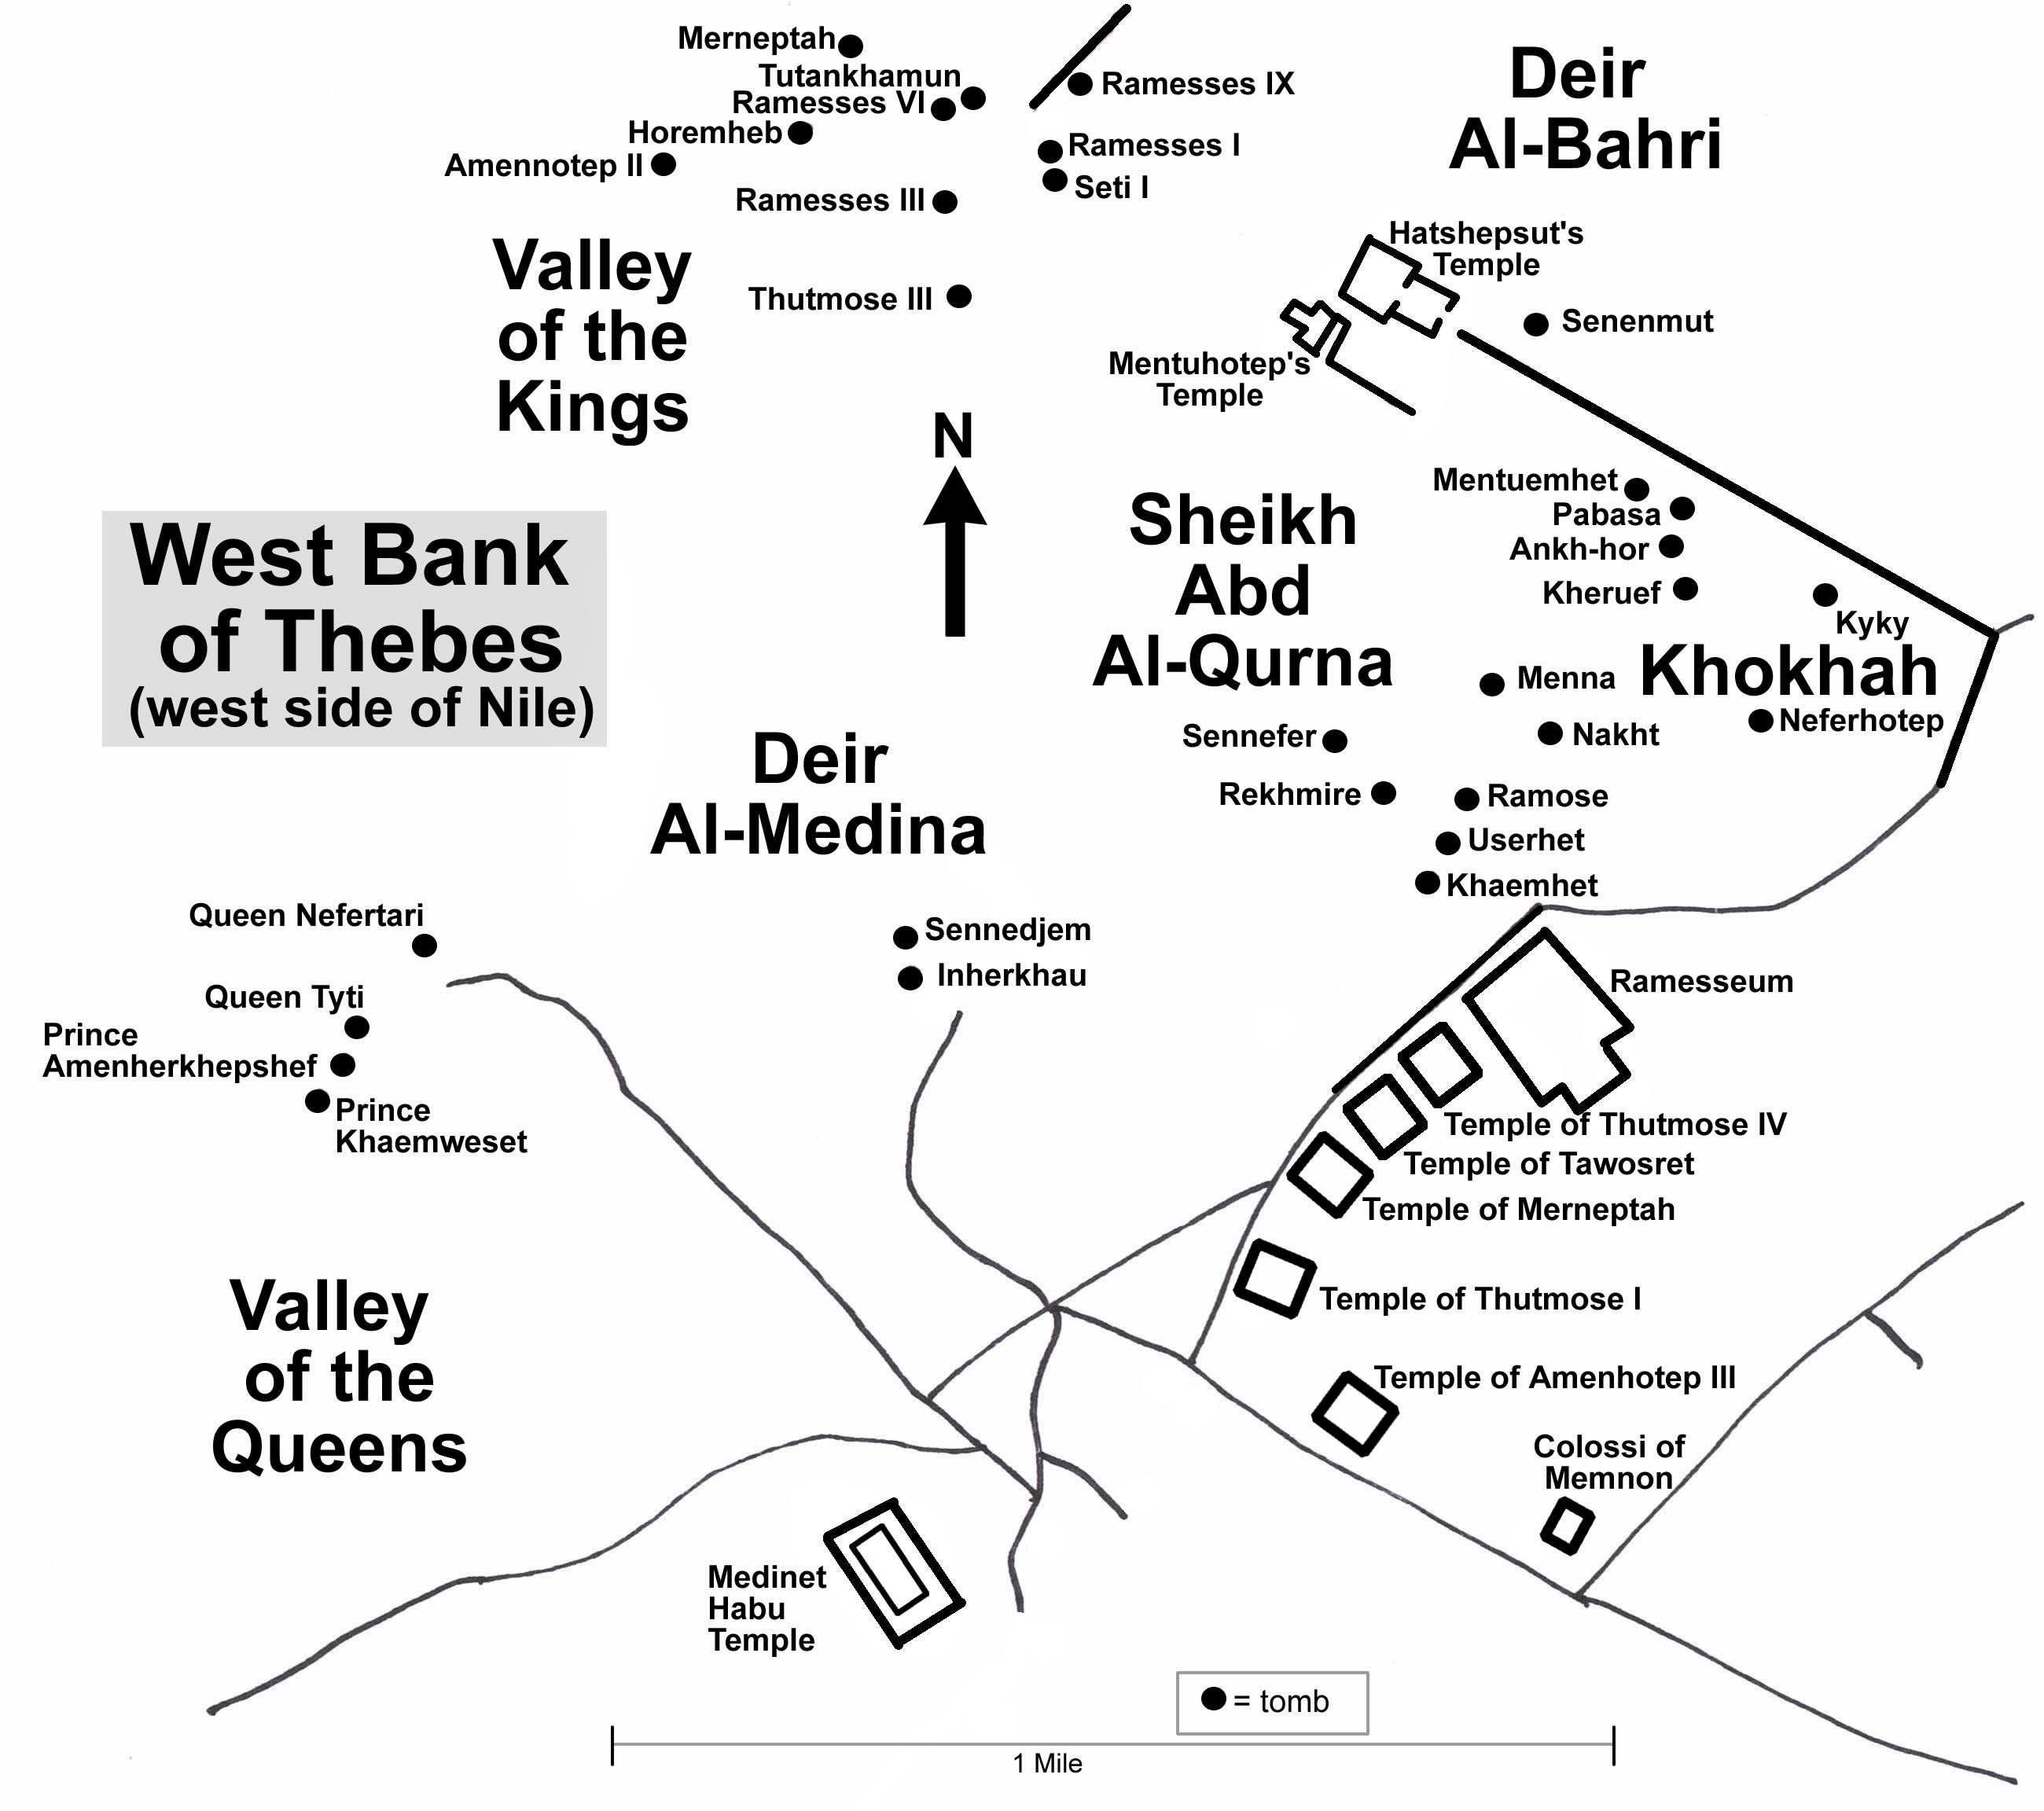 222E West Bank of Thebes on Nile Valley of the Kings